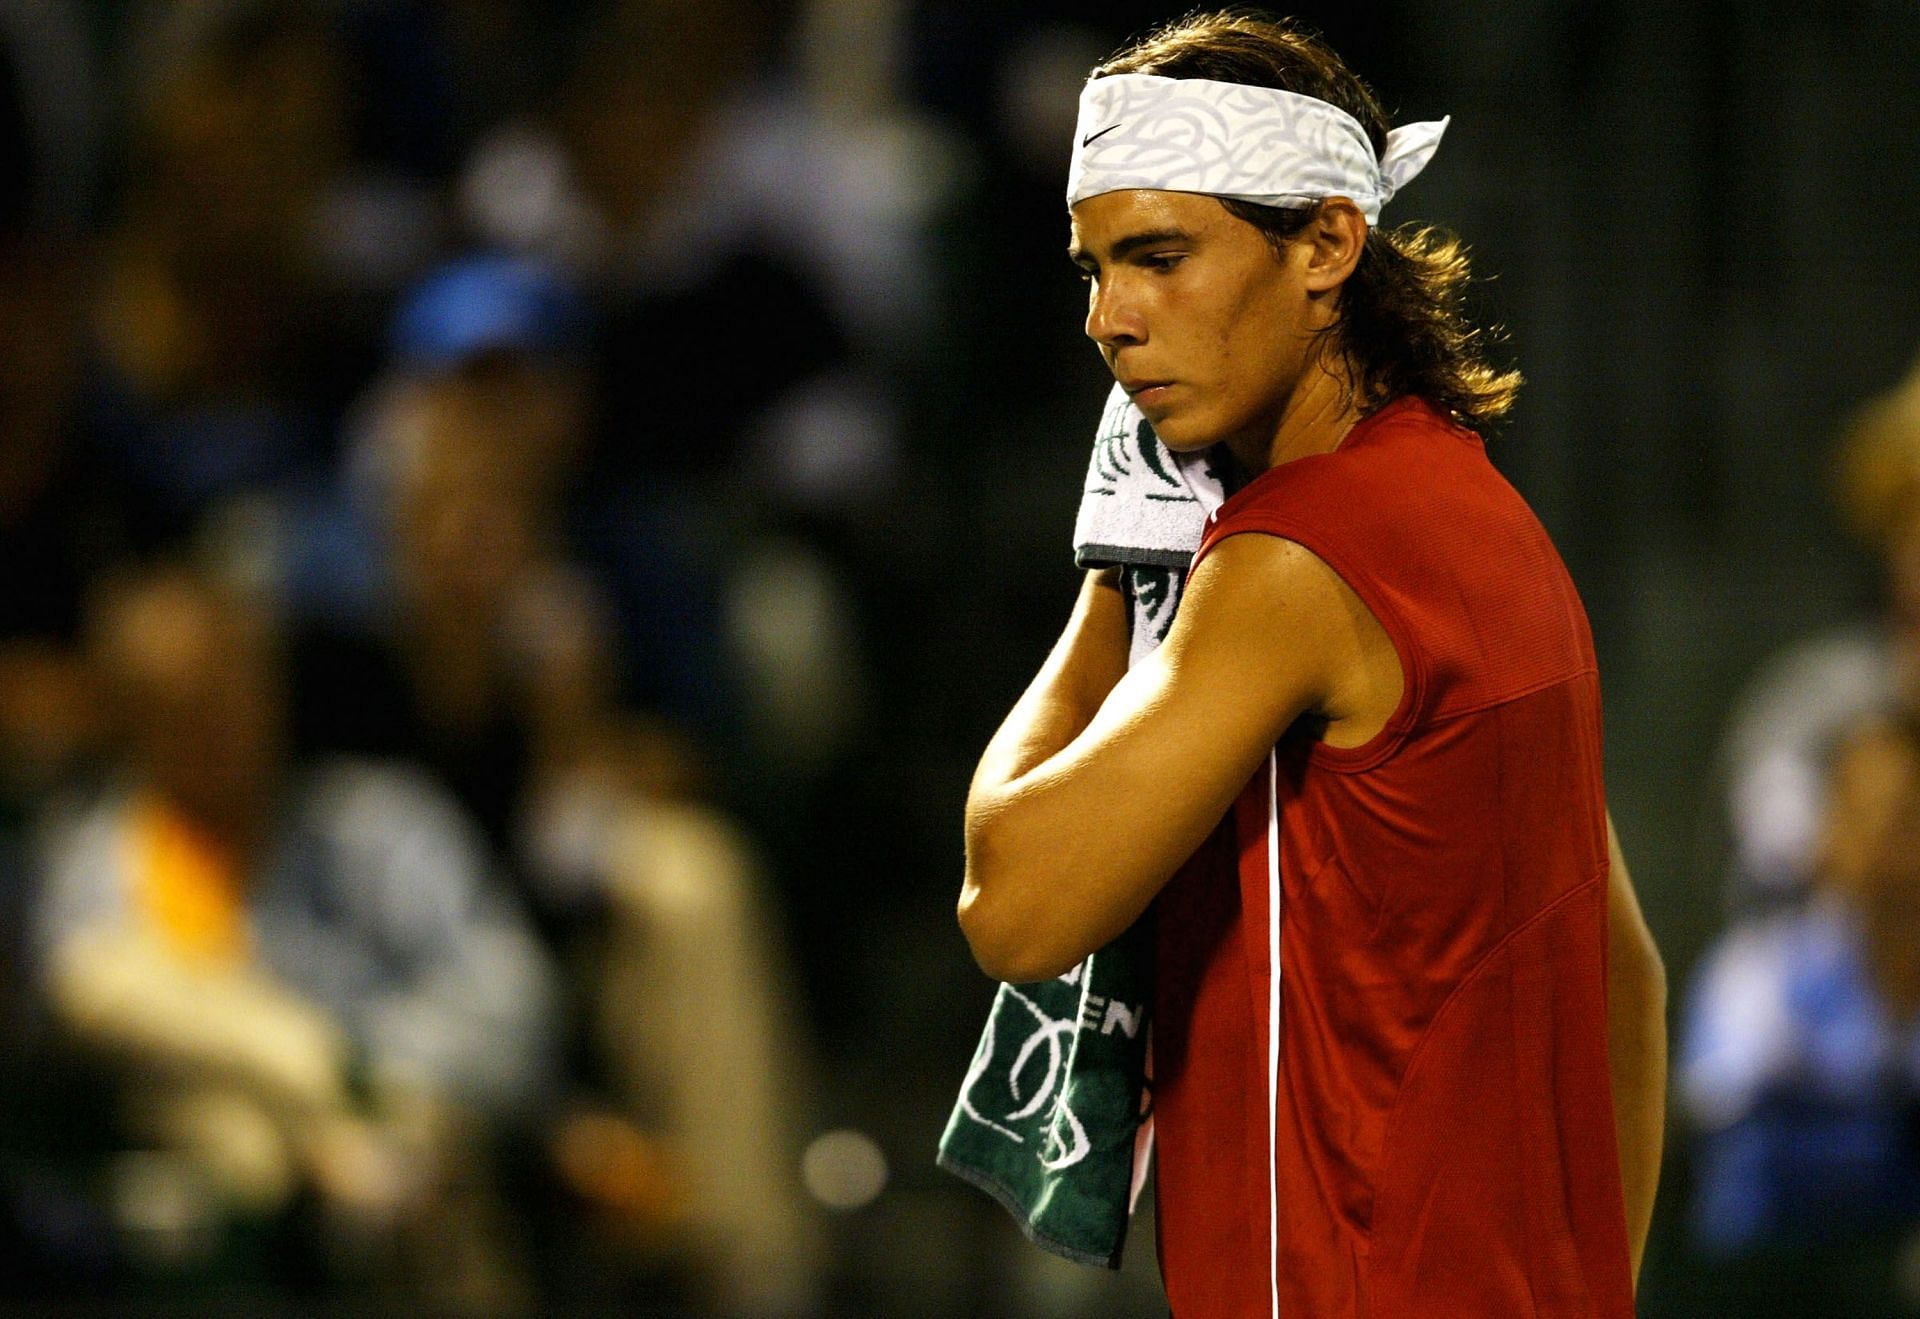 Rafael Nadal during his match against Roger Federer in Miami